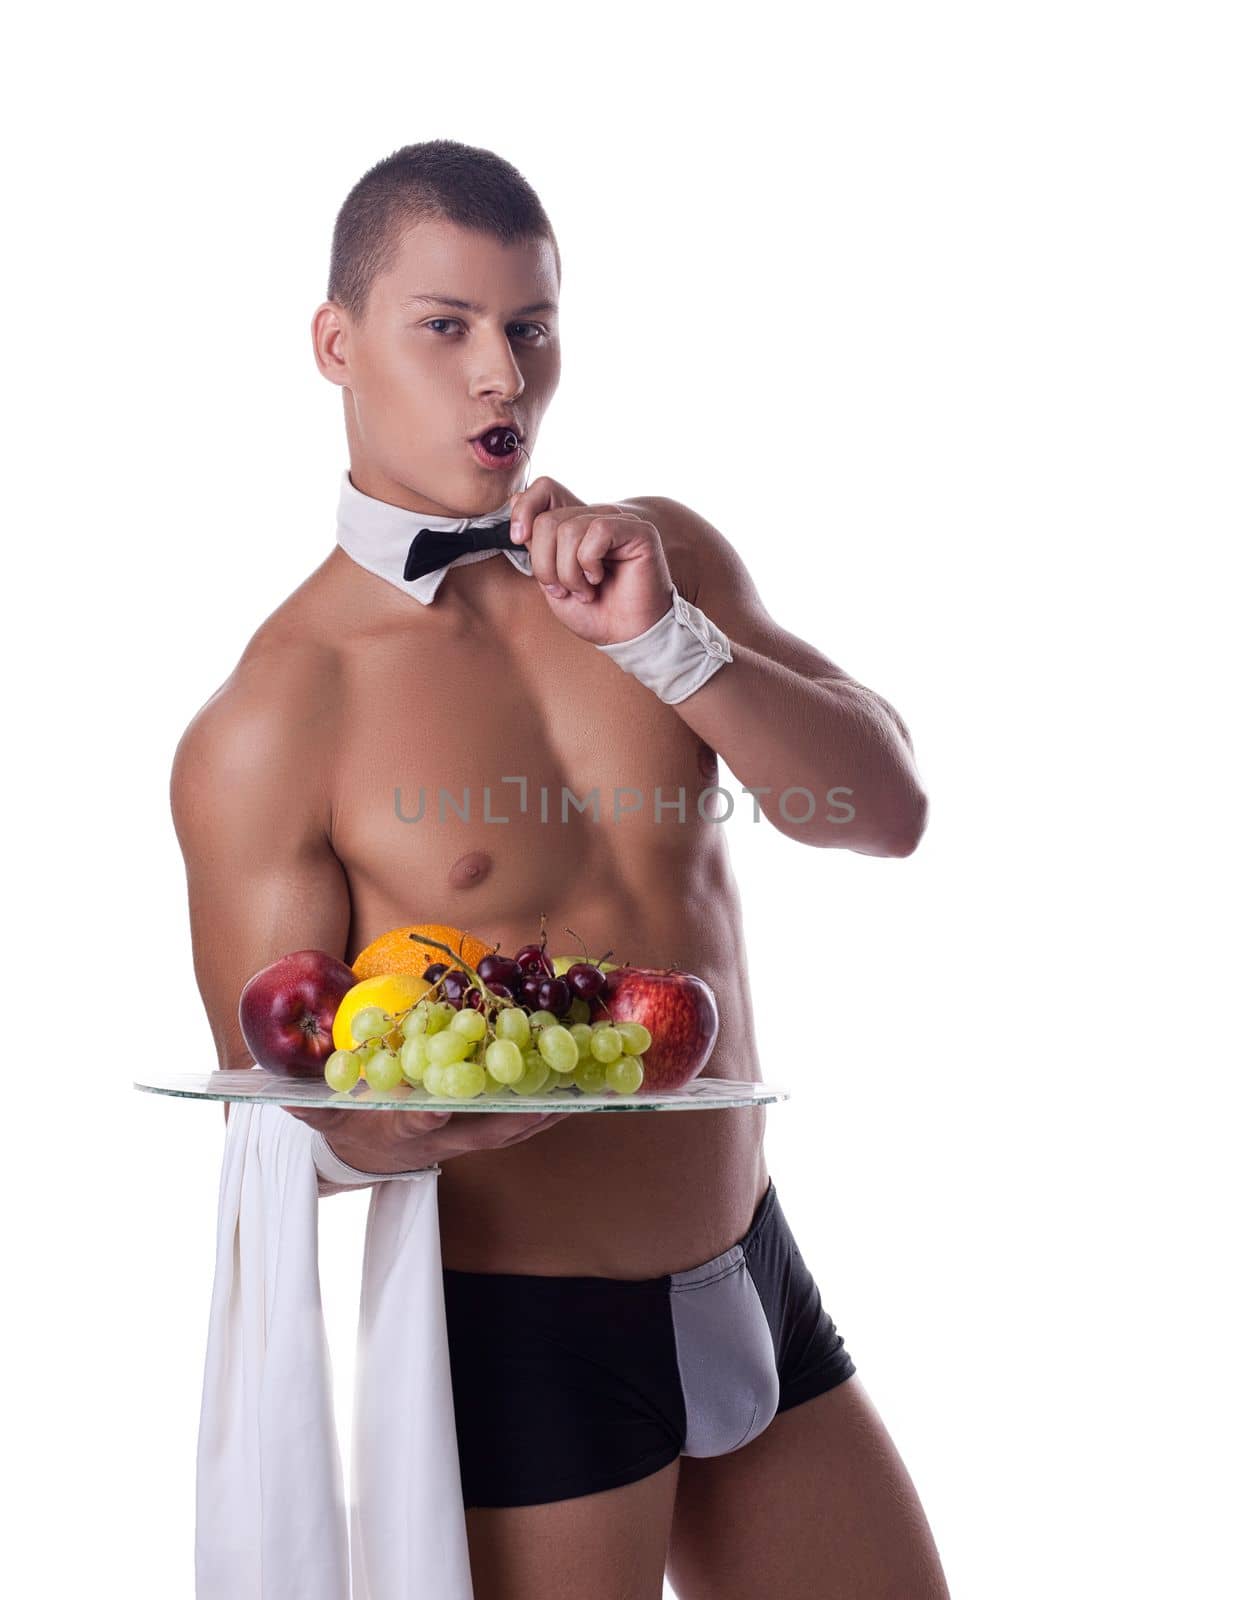 athletic man like striptease waiter hold fruits and eat cherry